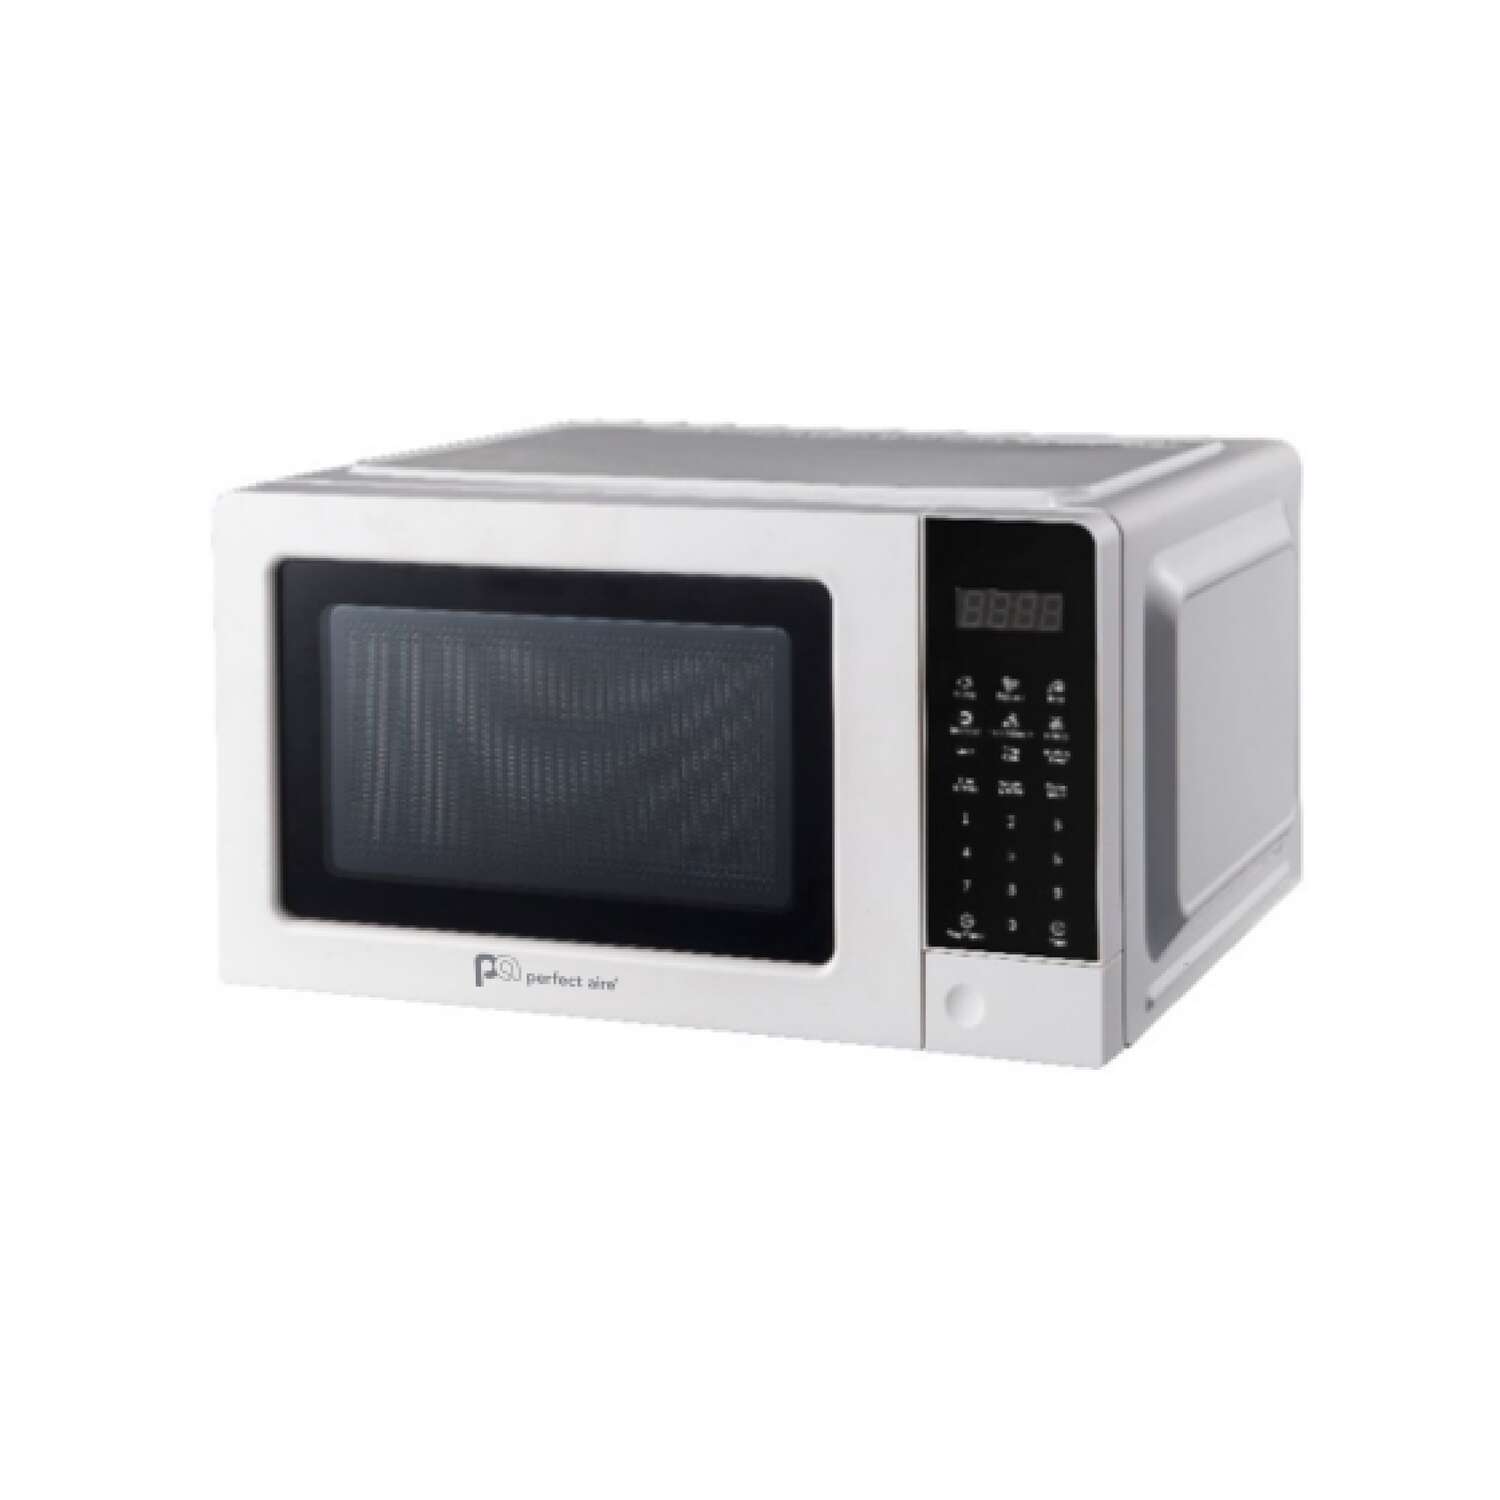 Perfect Aire 0.7 cu. ft. White Microwave 700 watt - Ace Hardware